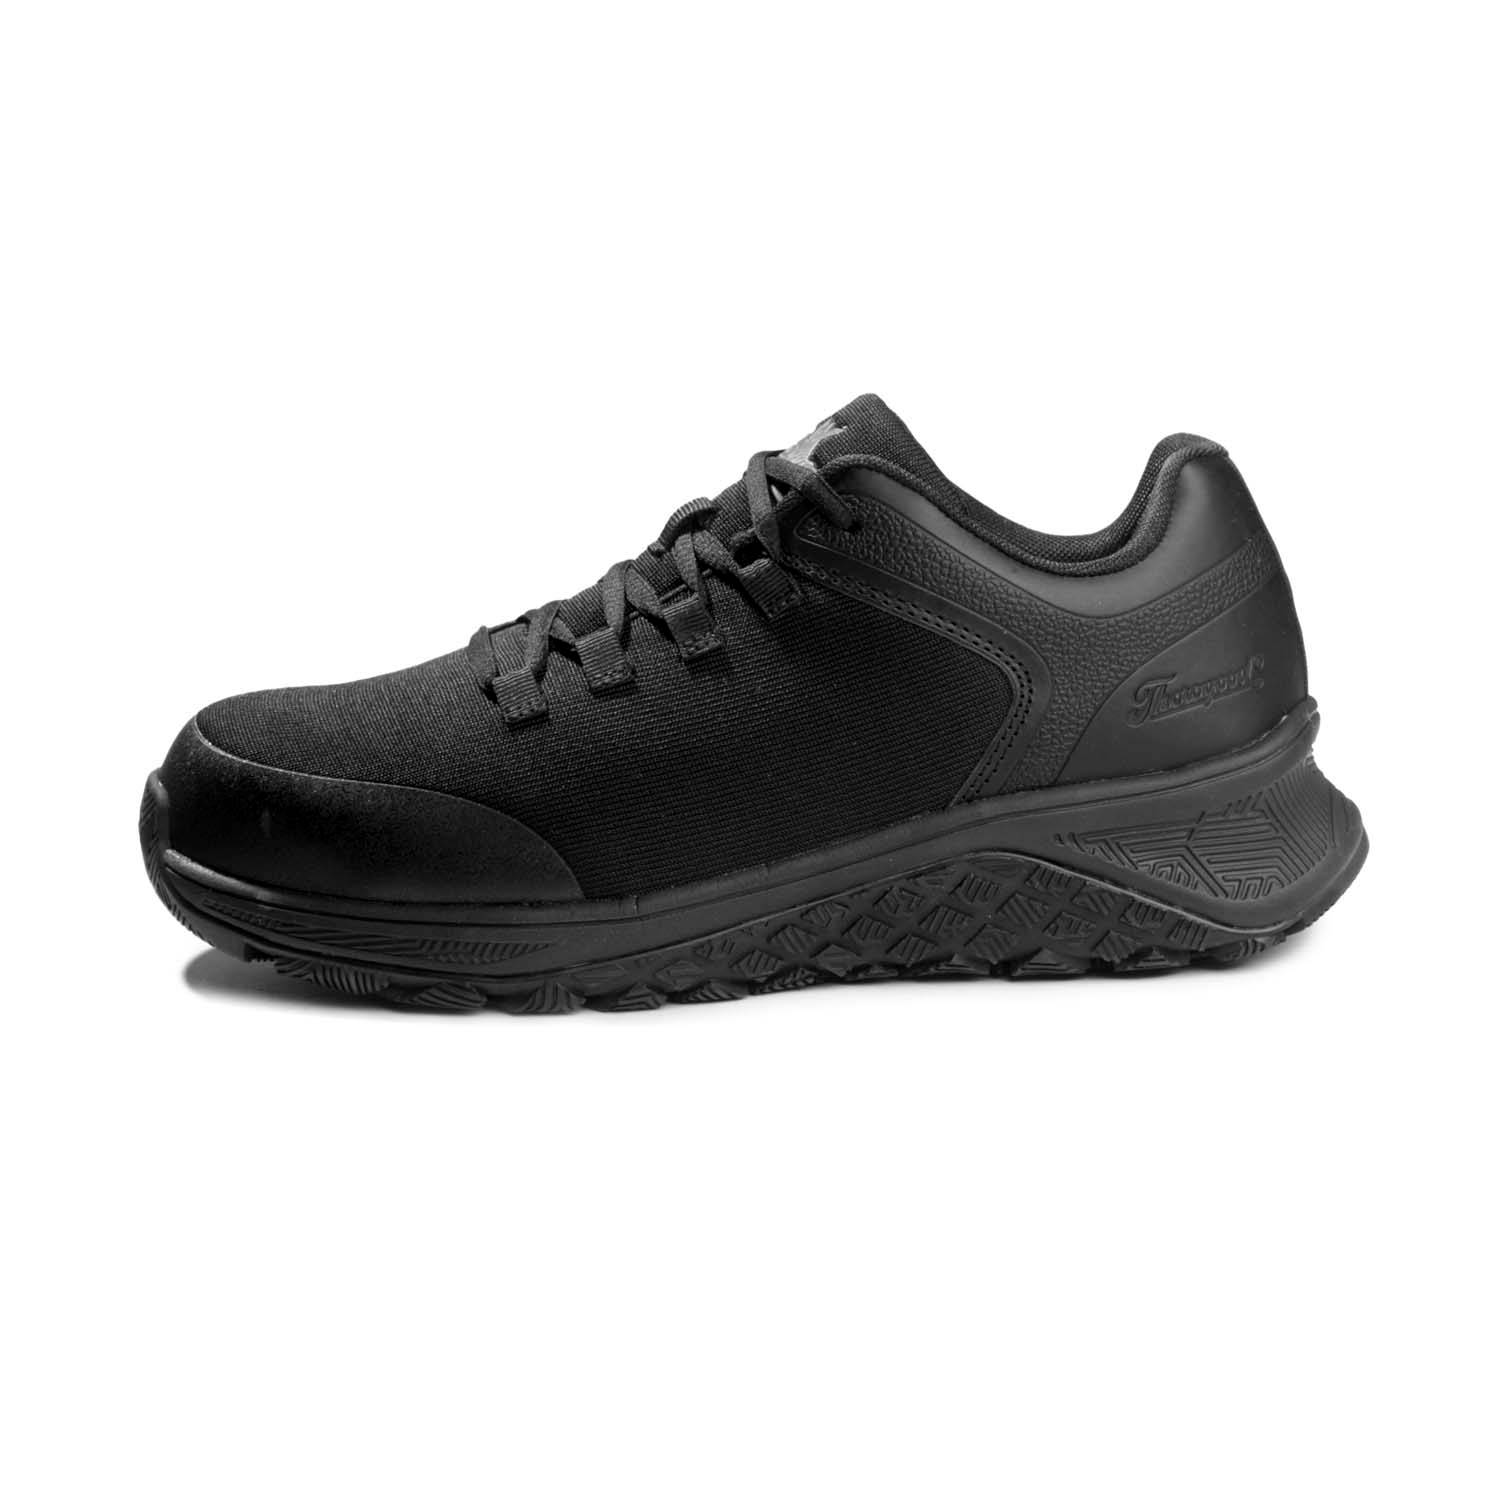 Thorogood T800 Low Composite Toe Oxfords | Safety Toe Shoes